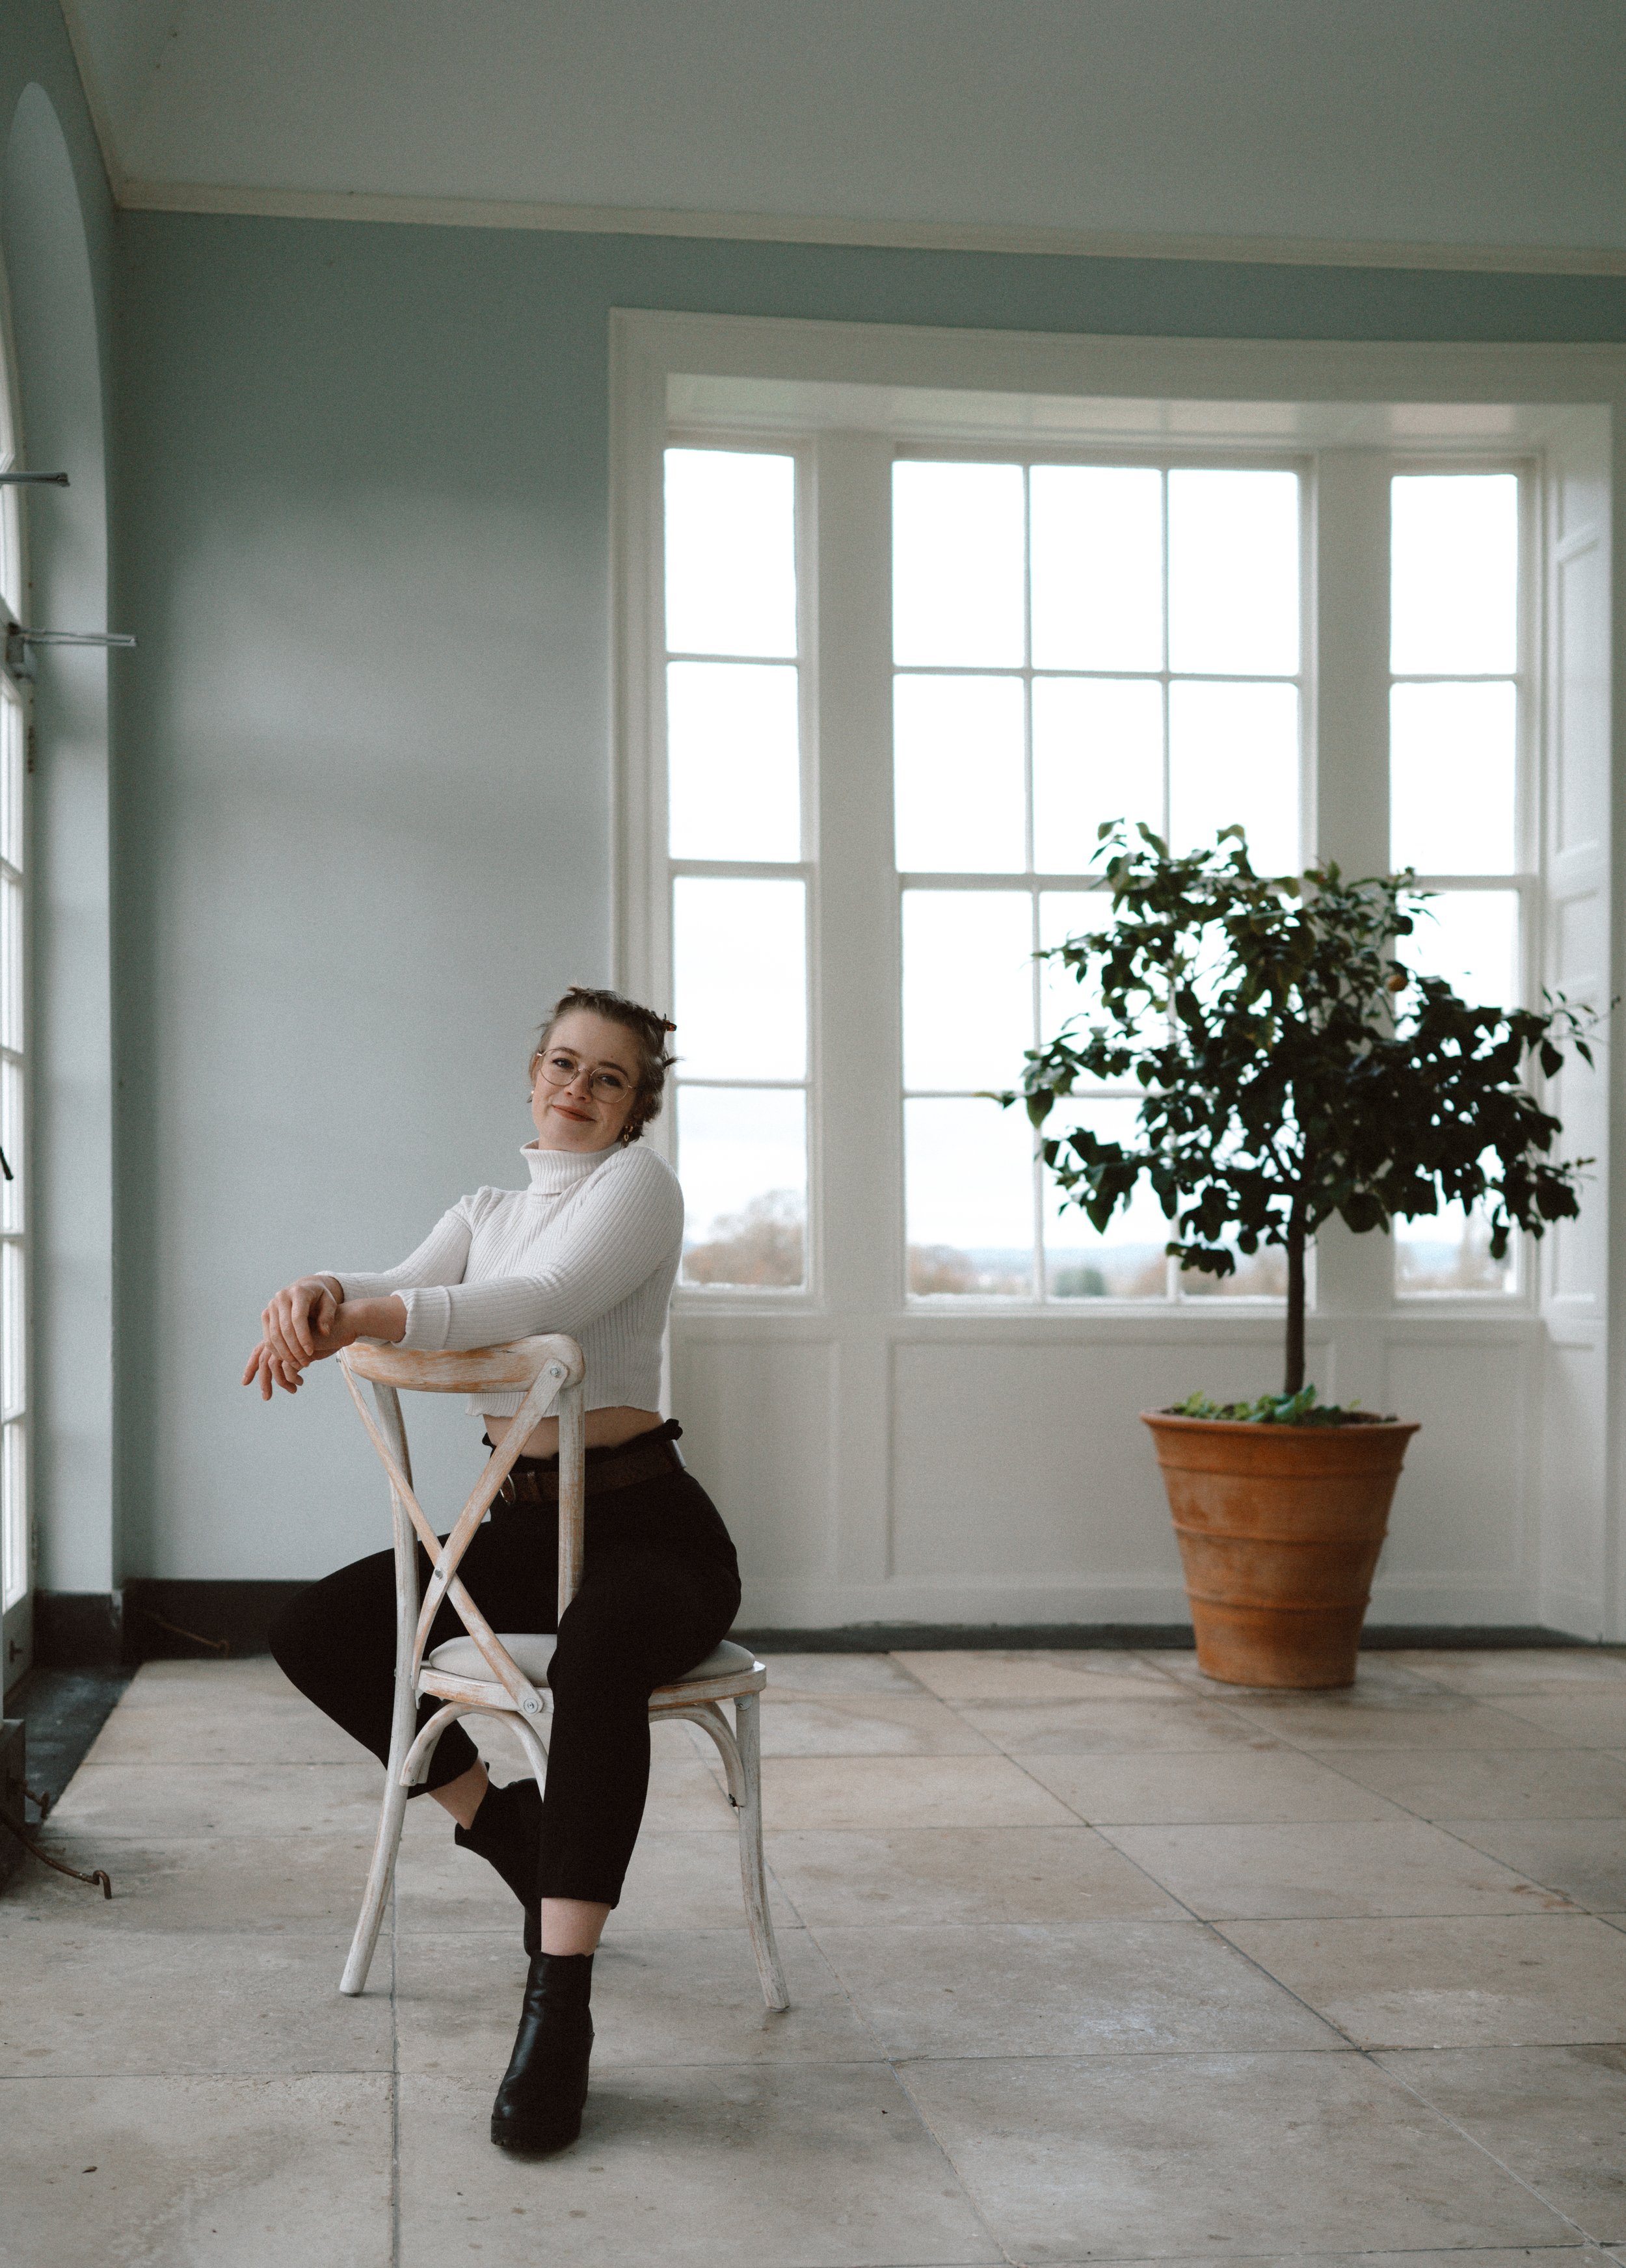 Photo of Alannah Veitch, a wedding content creator. She is a white woman in her twenties, wearing a white jumper and black trousers, sitting on a chair in a large empty room.